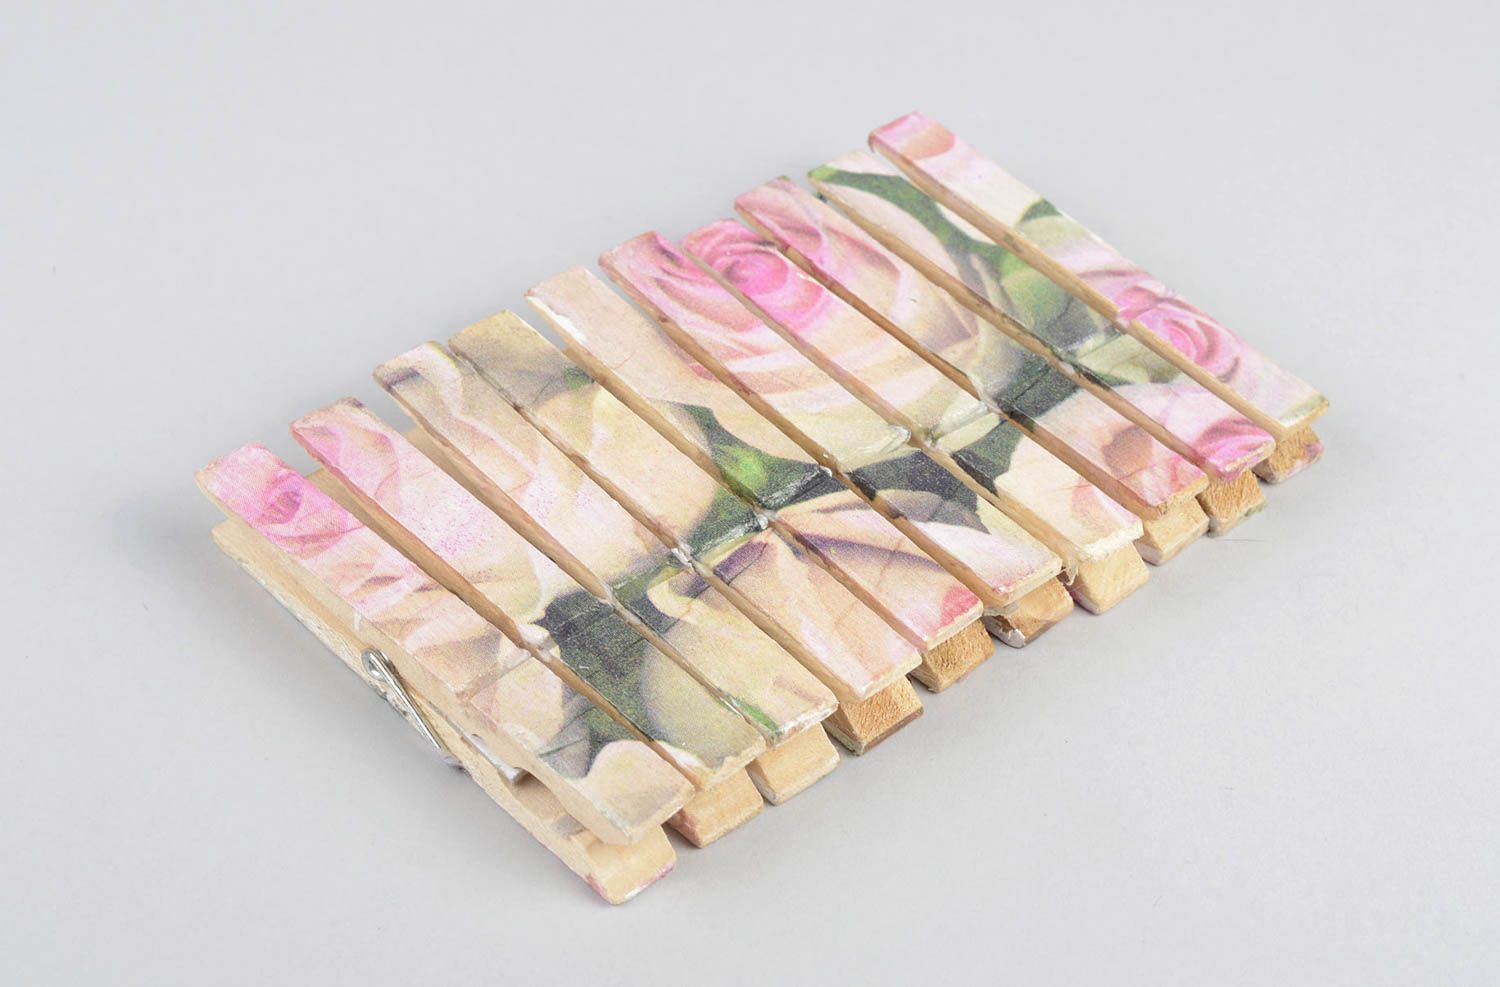 Handmade wooden clothespins ecorative clothespins perfect souvenir for kids photo 1